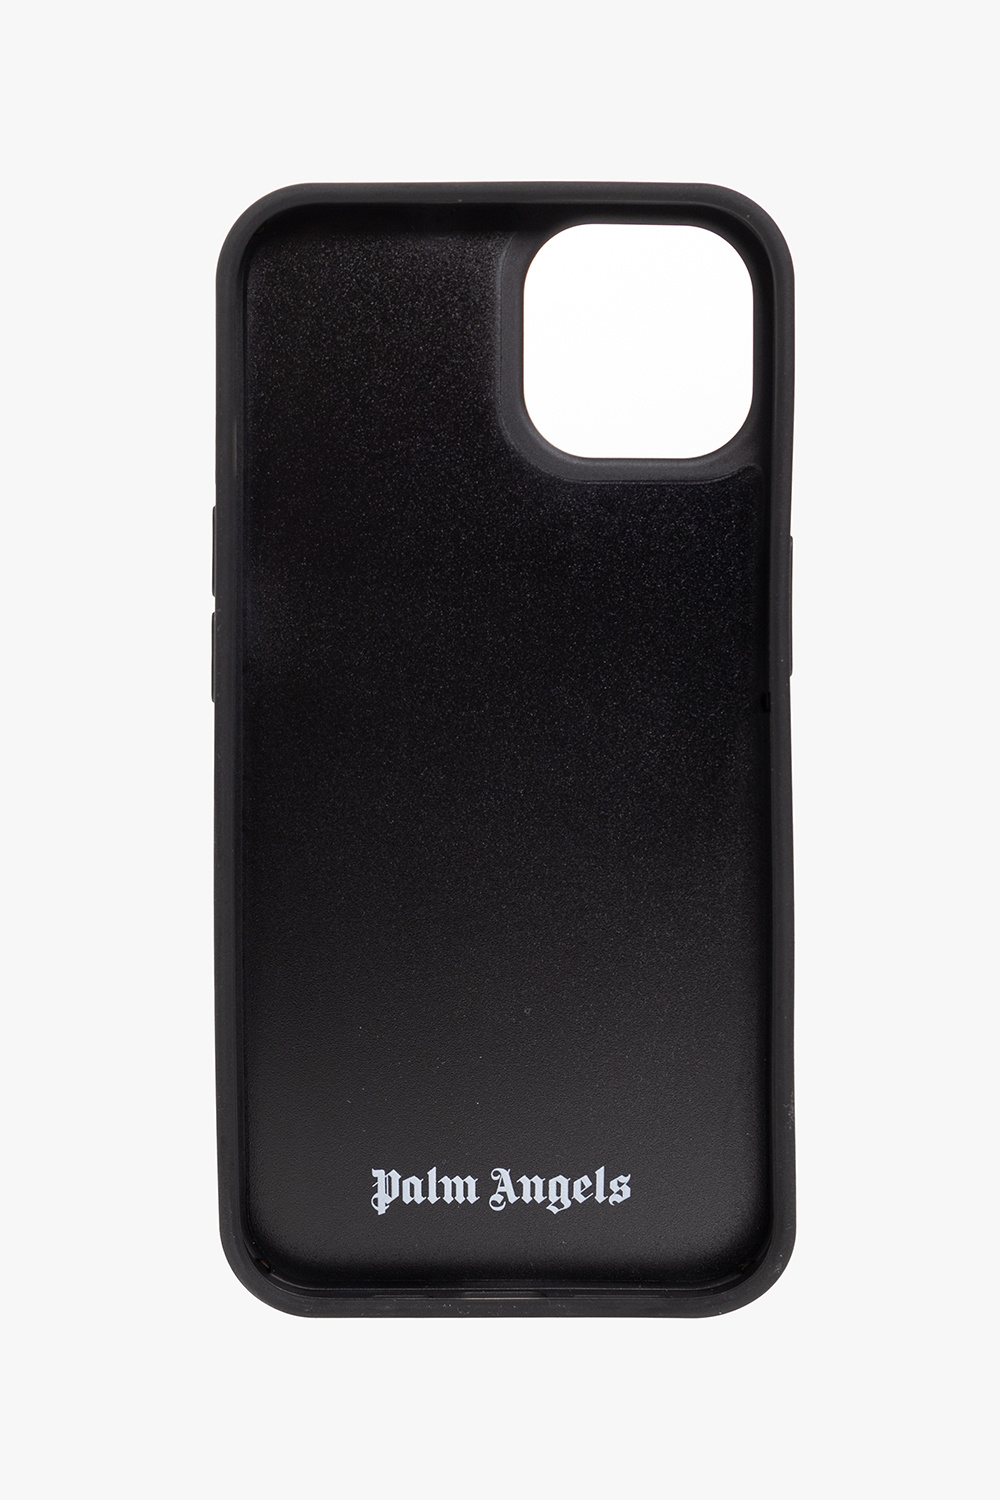 Palm Angels THIS SEASONS MUST-HAVES